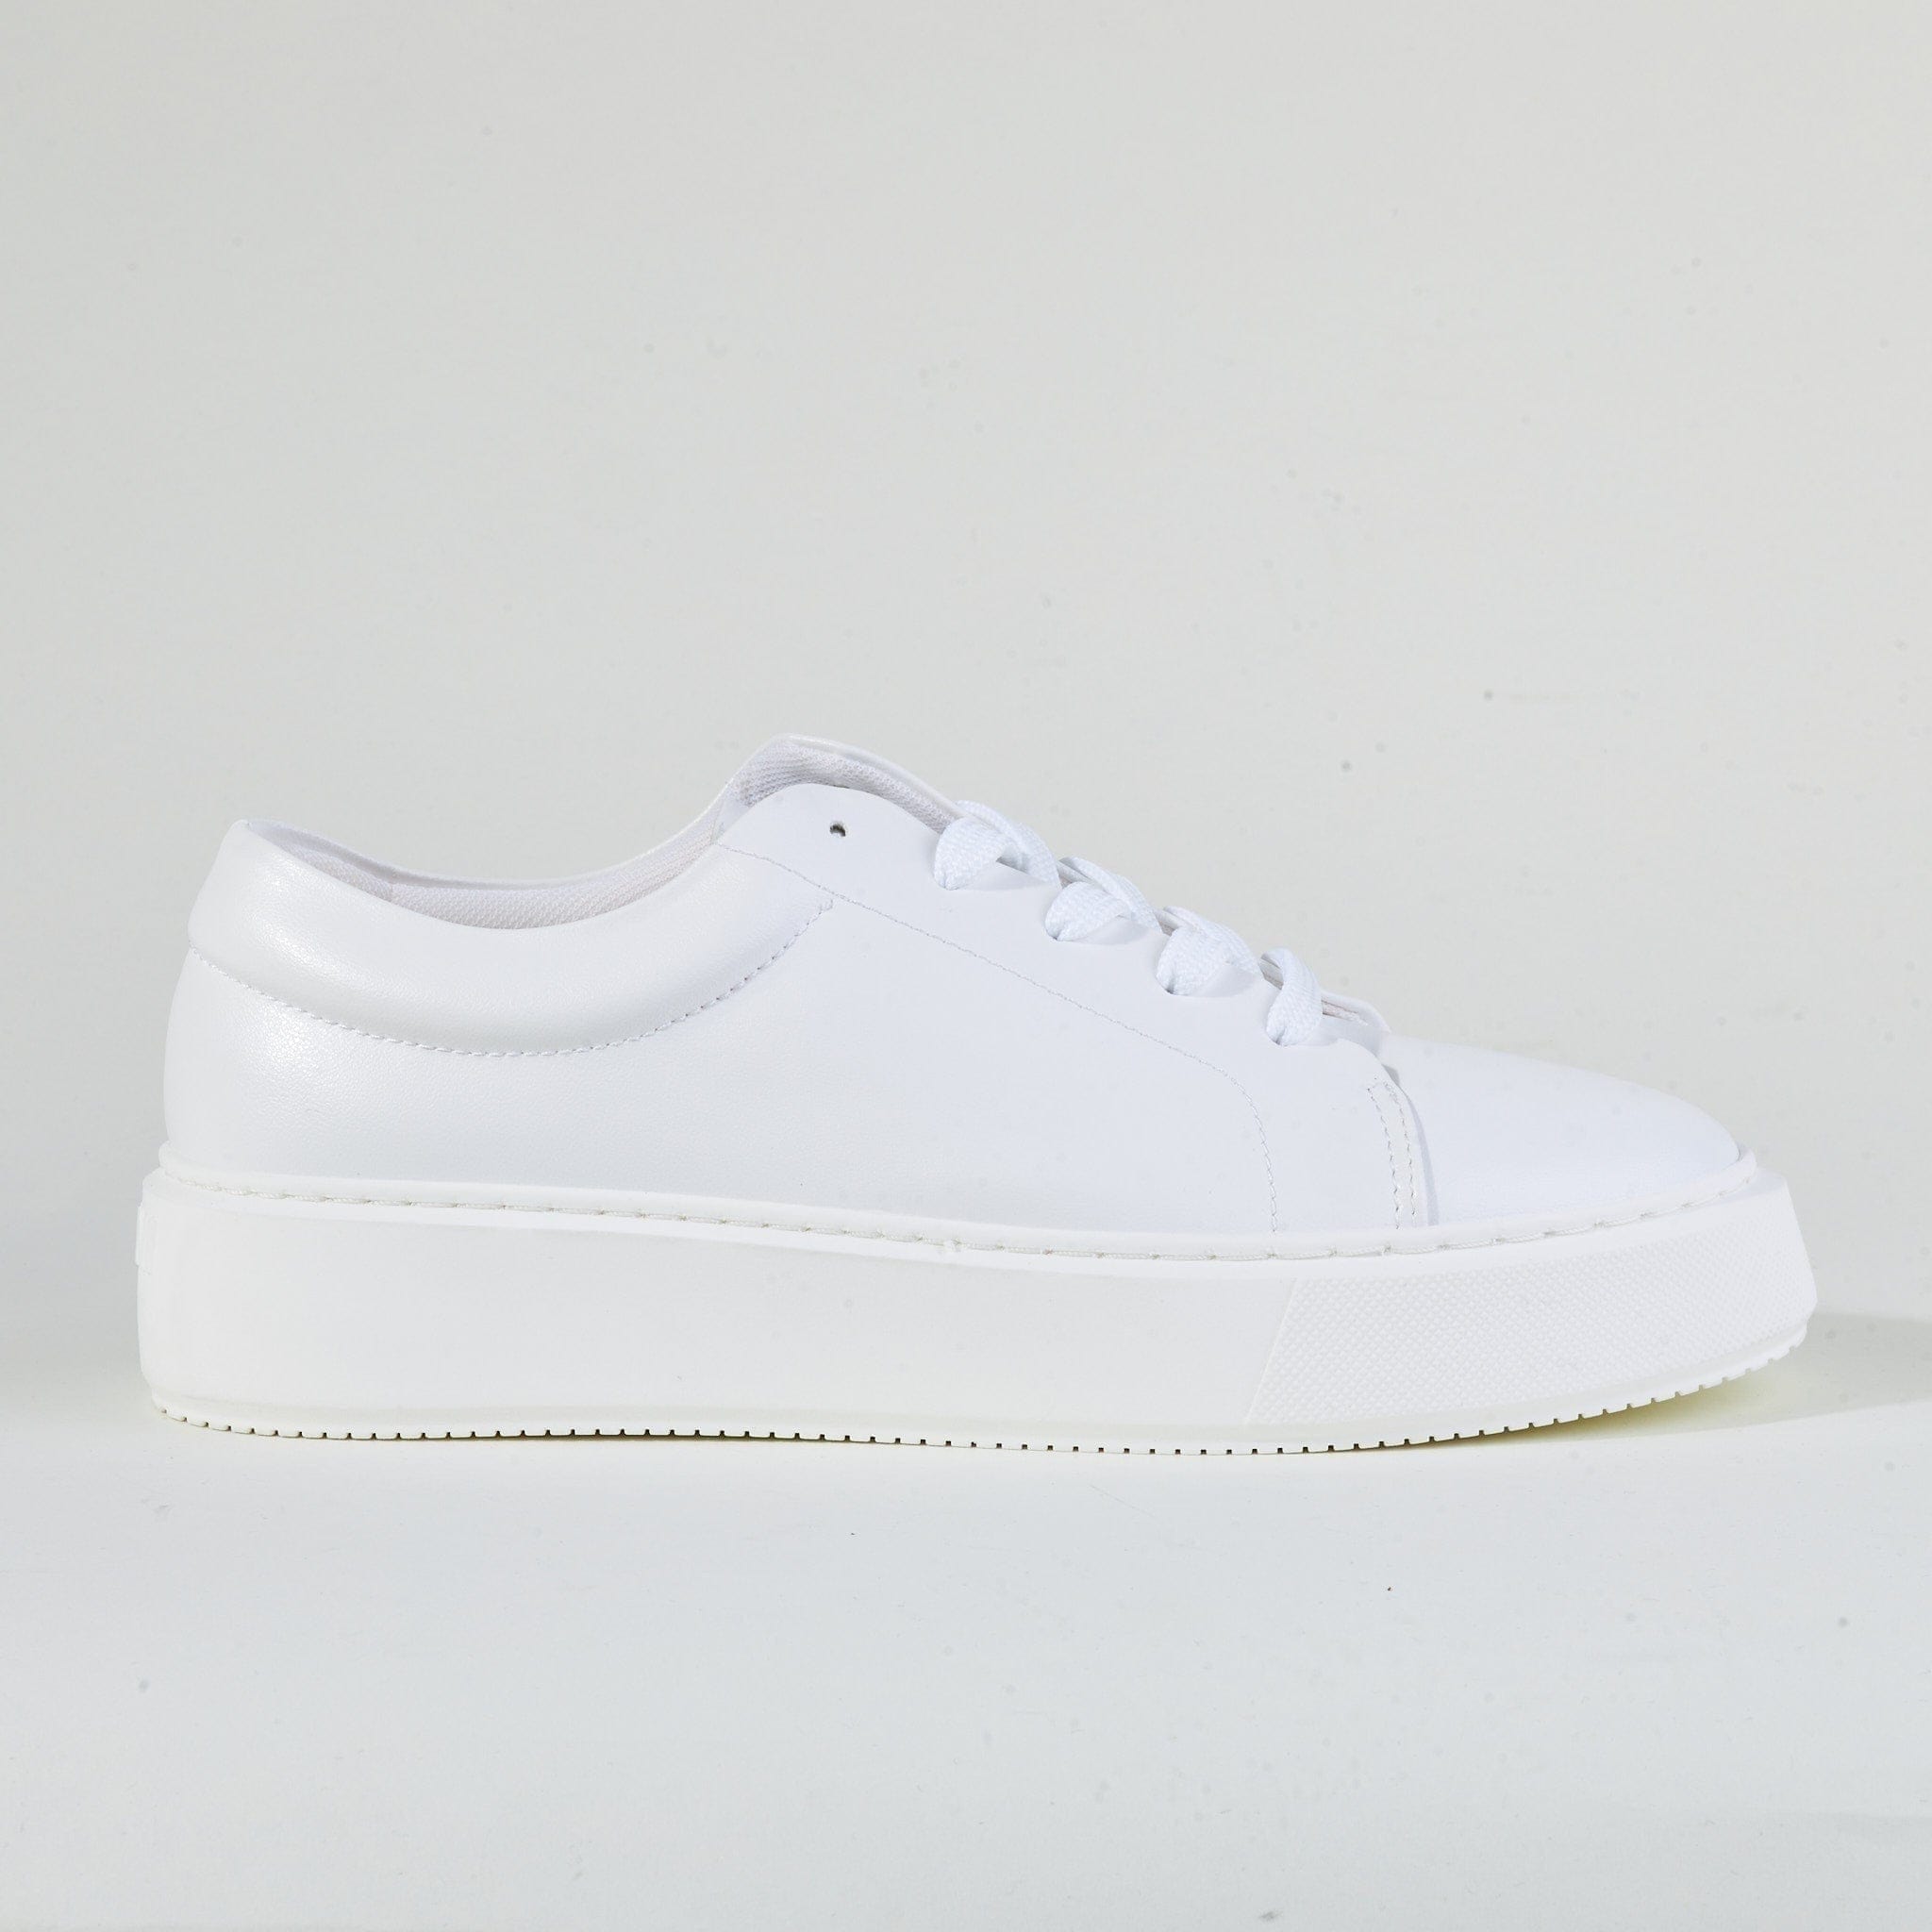 Ganni Women's Sporty White Trainers product